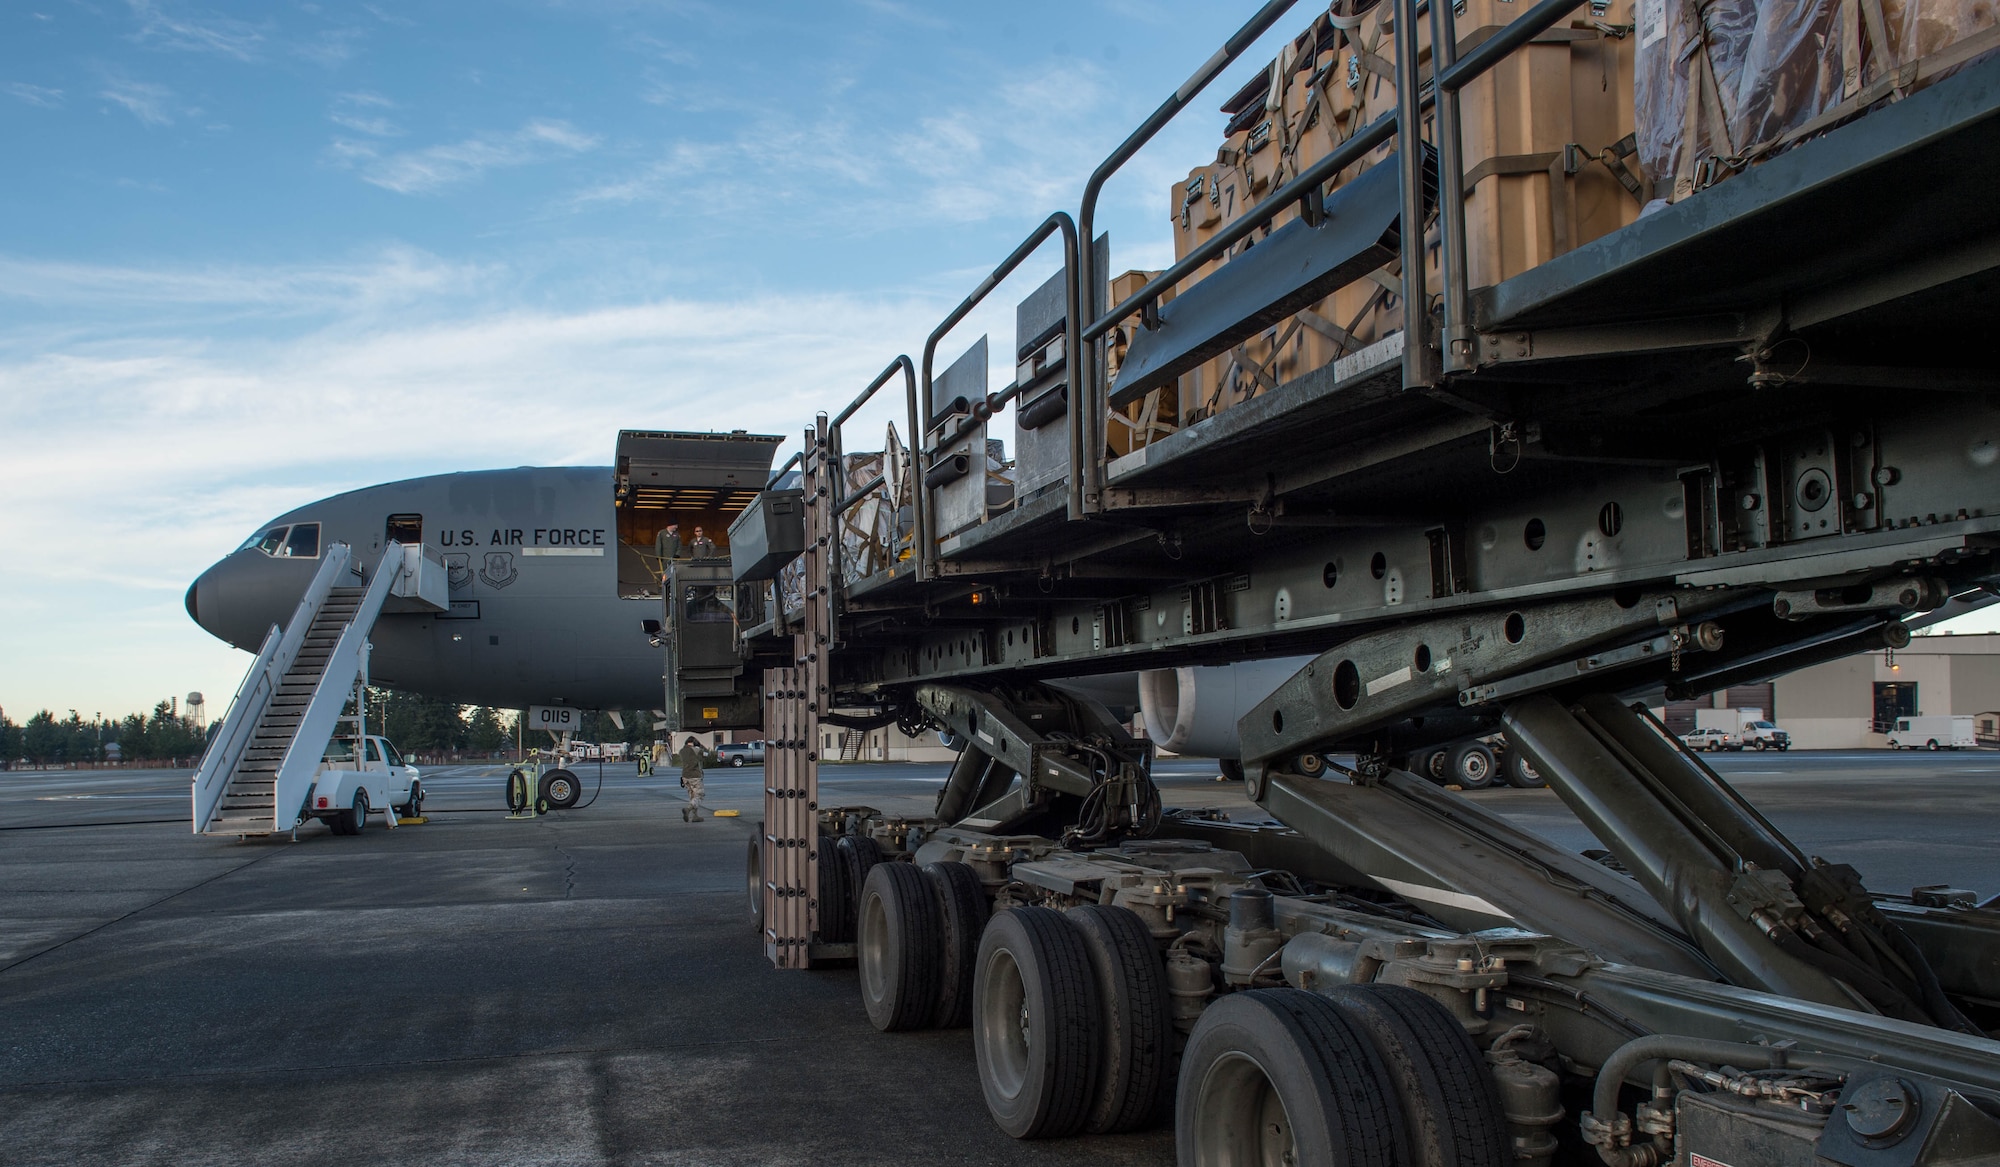 Aerial port Airmen from the 821st Contingency Response Group, use a K-loader to load cargo onto a KC-10 Extender aircraft from Travis Air Force Base, Calif., Jan. 23, 2017, at Joint Base Lewis-McChord, Washington. Airmen from the 821st Contingency Response Group, exercised their capability to support humanitarian efforts during exercise Dragon Breath at JBLM and Fairchild Air Force Base. (U.S. Air Force photo by Staff Sgt. Robert Hicks)